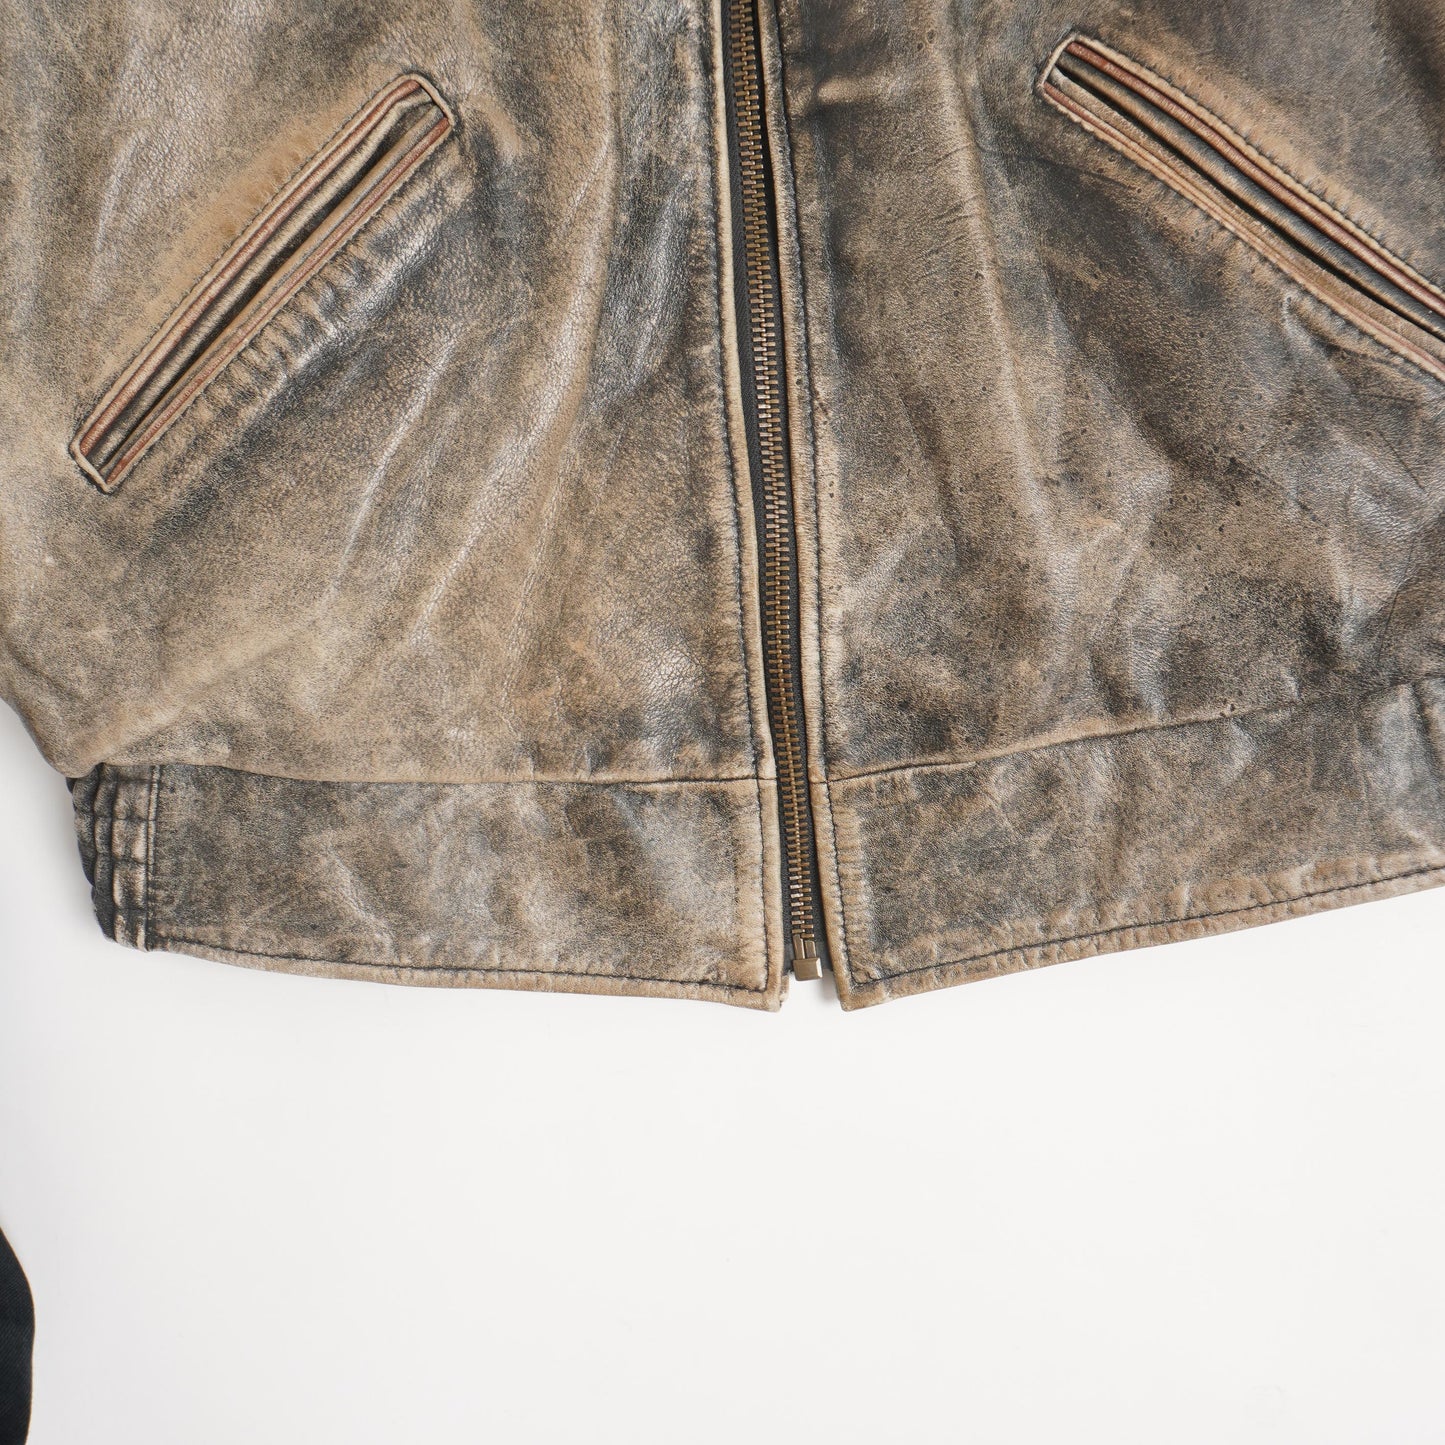 1990s HEAVY WEIGHT LEATHER JACKET - L